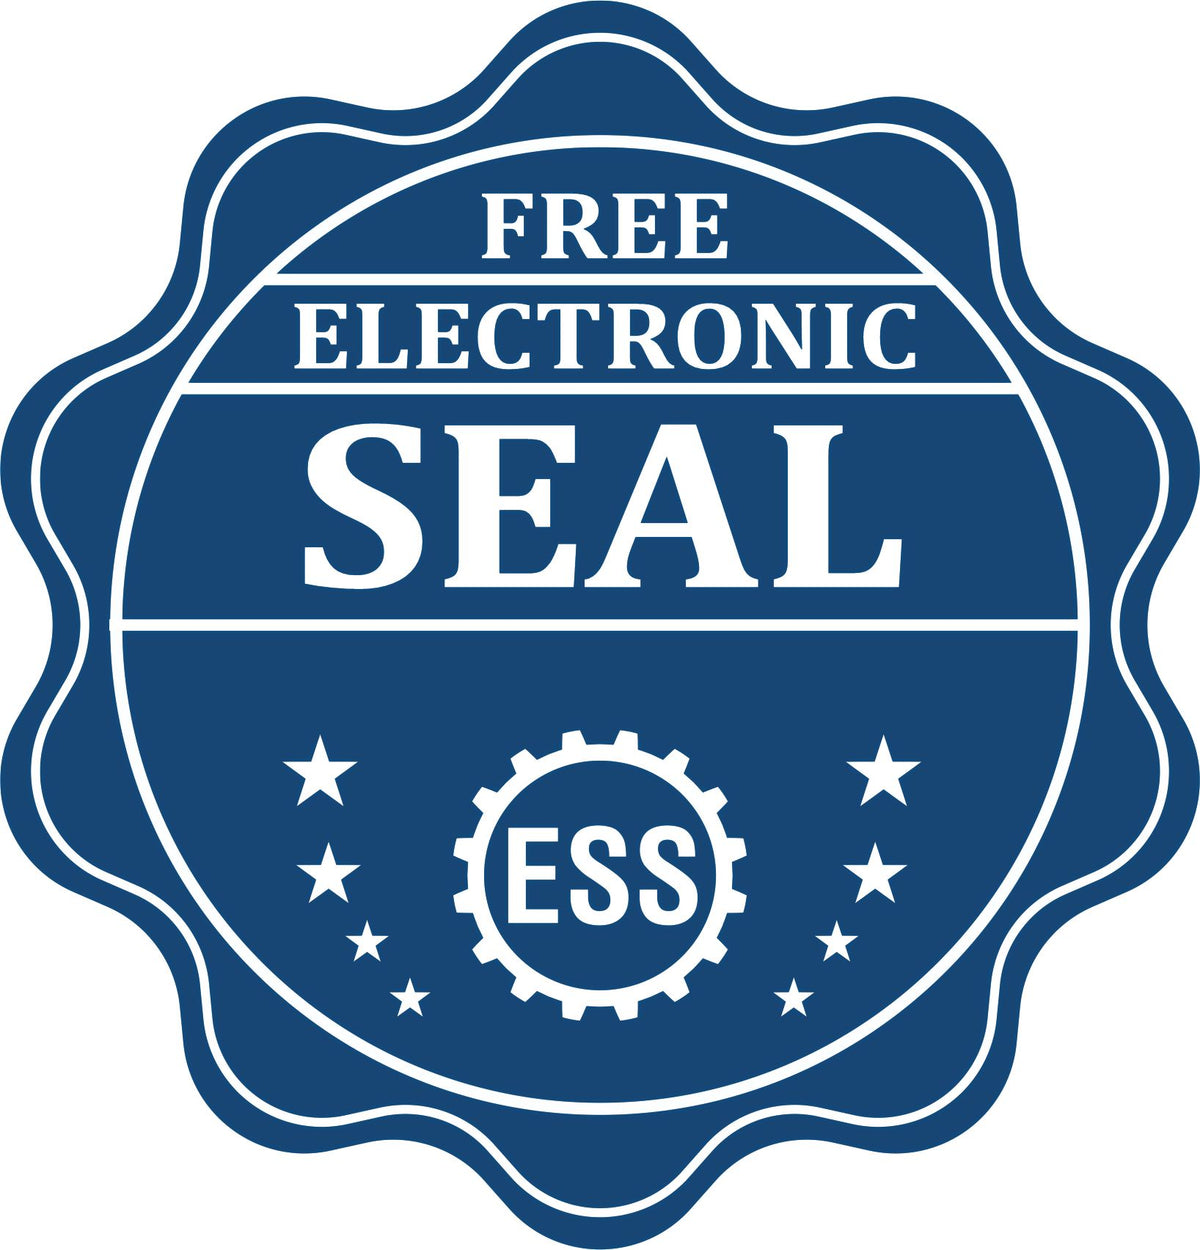 A badge showing a free electronic seal for the Handheld District of Columbia Professional Geologist Embosser with stars and the ESS gear on the emblem.